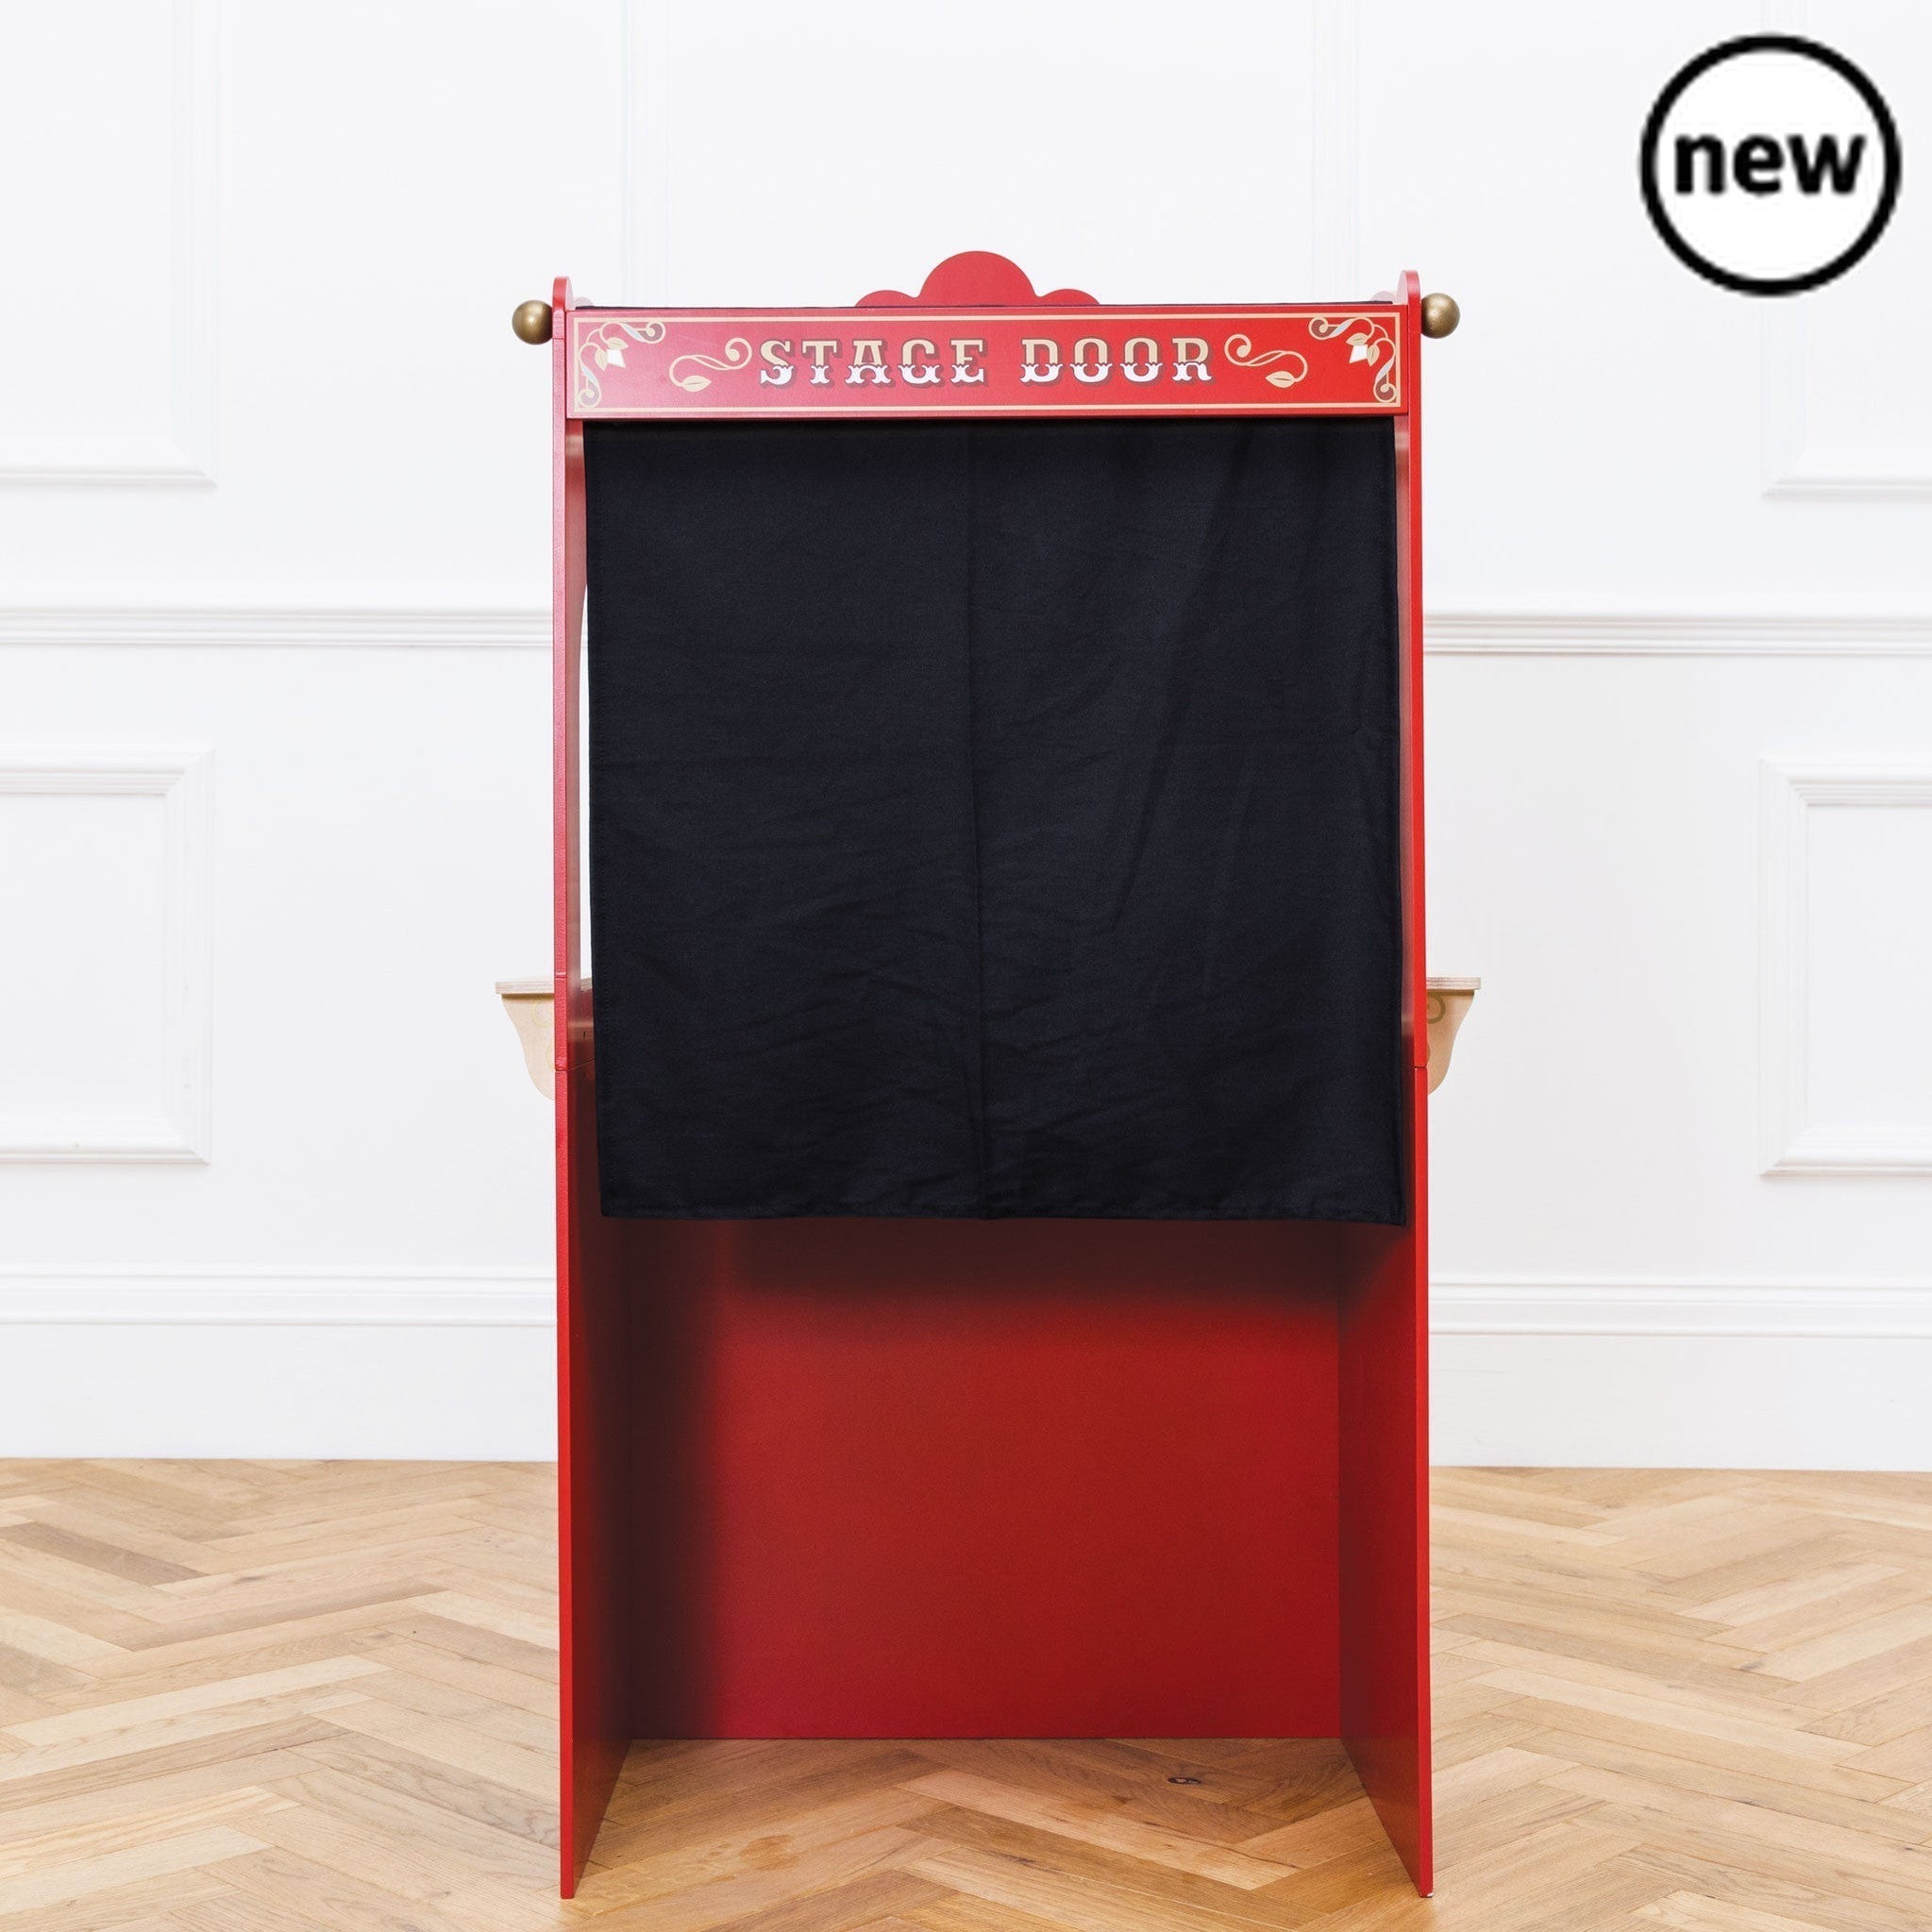 Showtime Puppet Theatre, Description The stage is set for roleplay fun! This amazing retro wooden puppet theatre toy is a real showstopper. With it's unique nostalgic design and brightly painted exterior, crafted from durable, sustainable wood. Little performers will adore this interactive toy, crammed with many realistic features to inspire imaginative learning. With a reversible sign, stage door and two chalk boards to display up and coming acts. For dramatic effect, we've included a pair of beautiful red